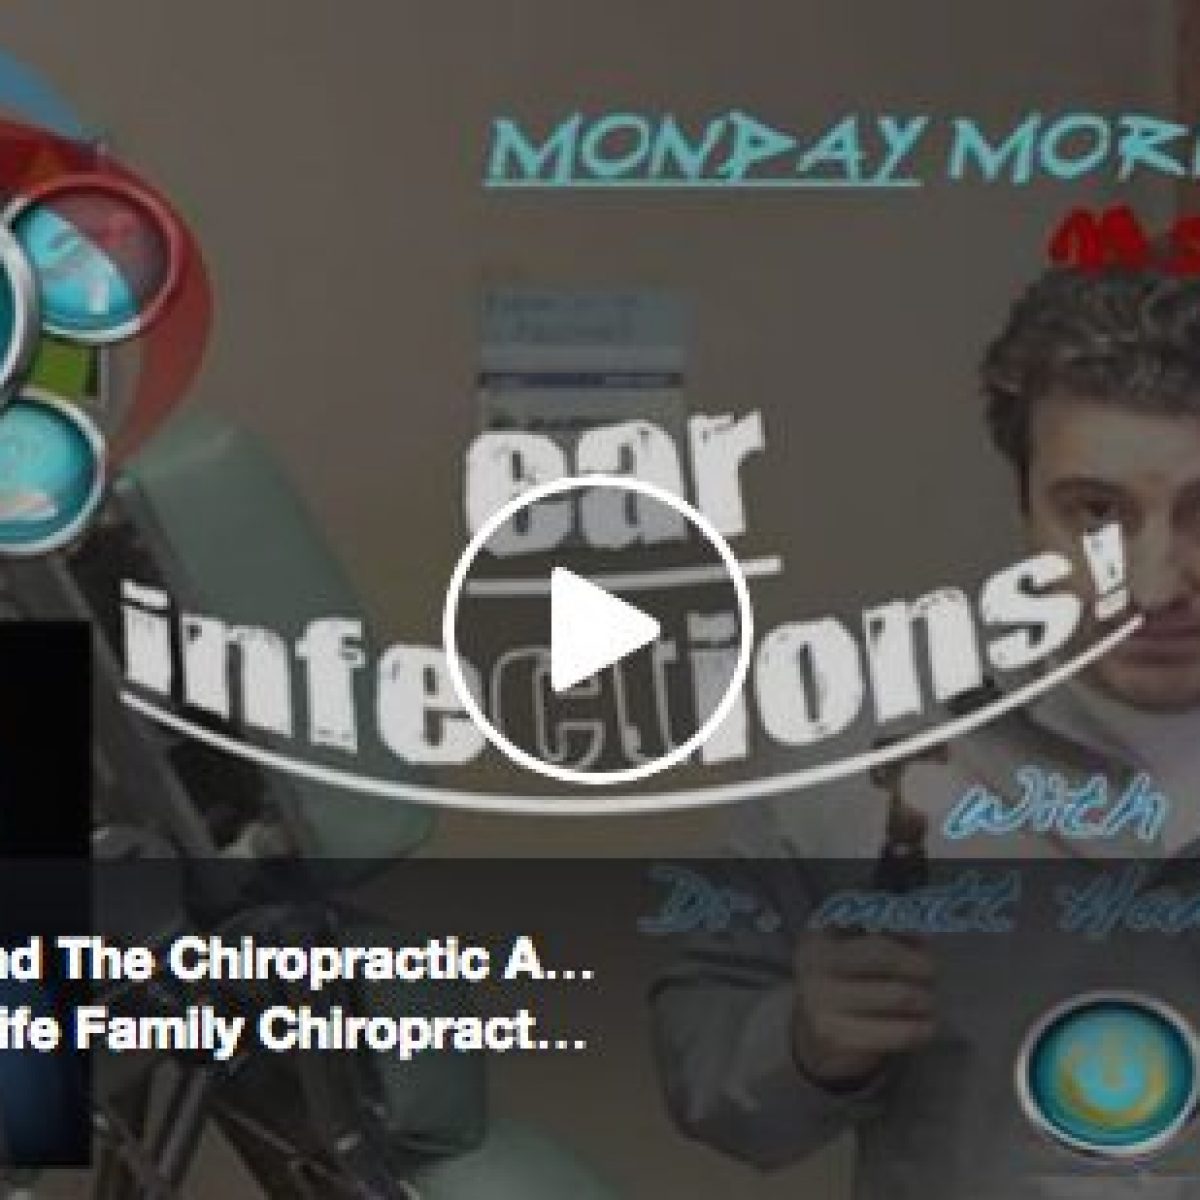 Ear Infections & The Chiropractic Approach